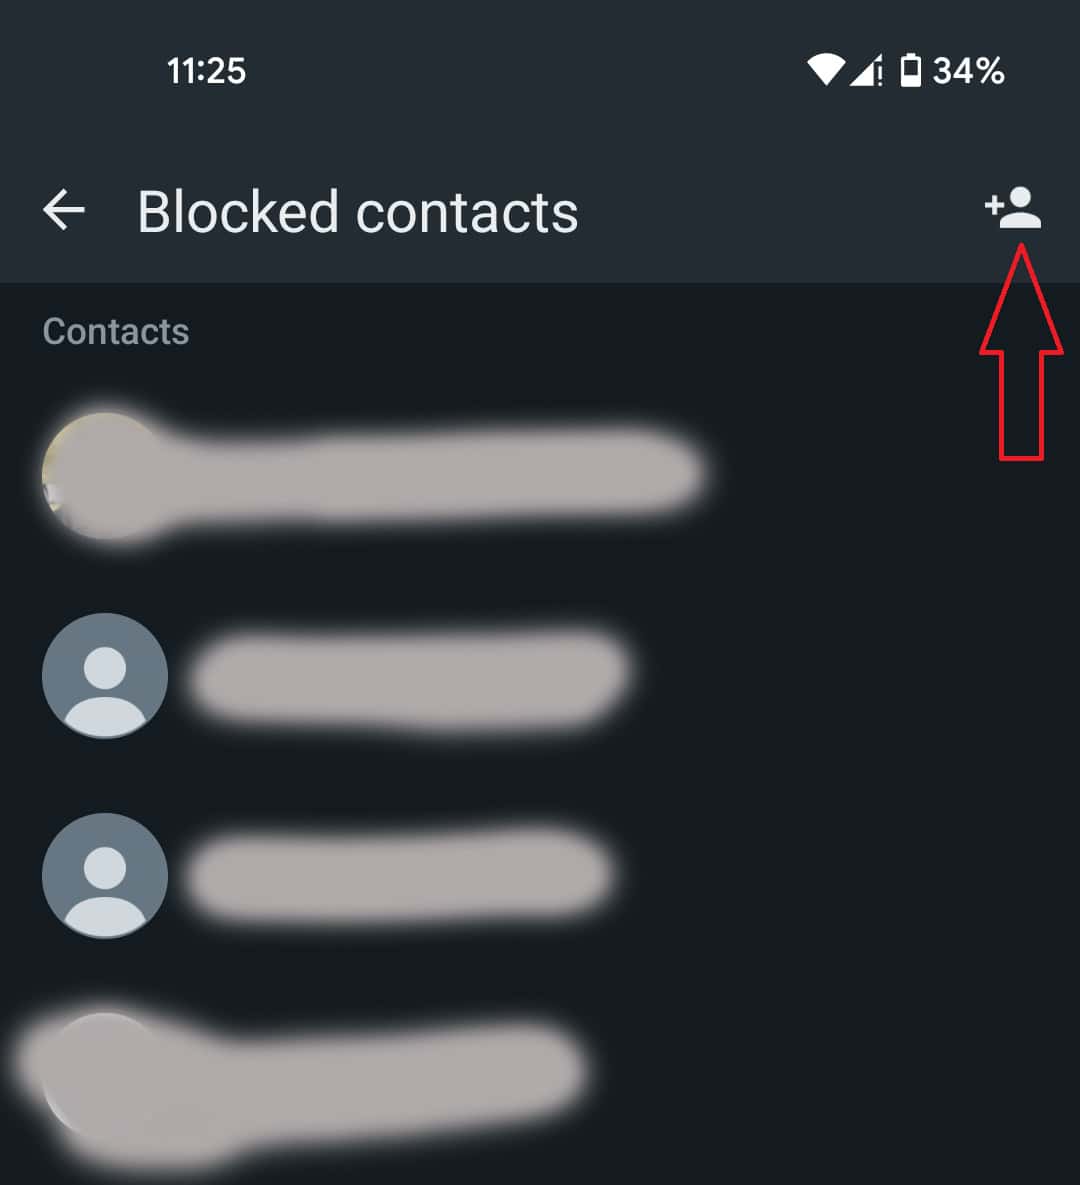 Screenshot of a smartphone interface displaying how to block someone on WhatsApp, with an arrow pointing to an 'add' icon.